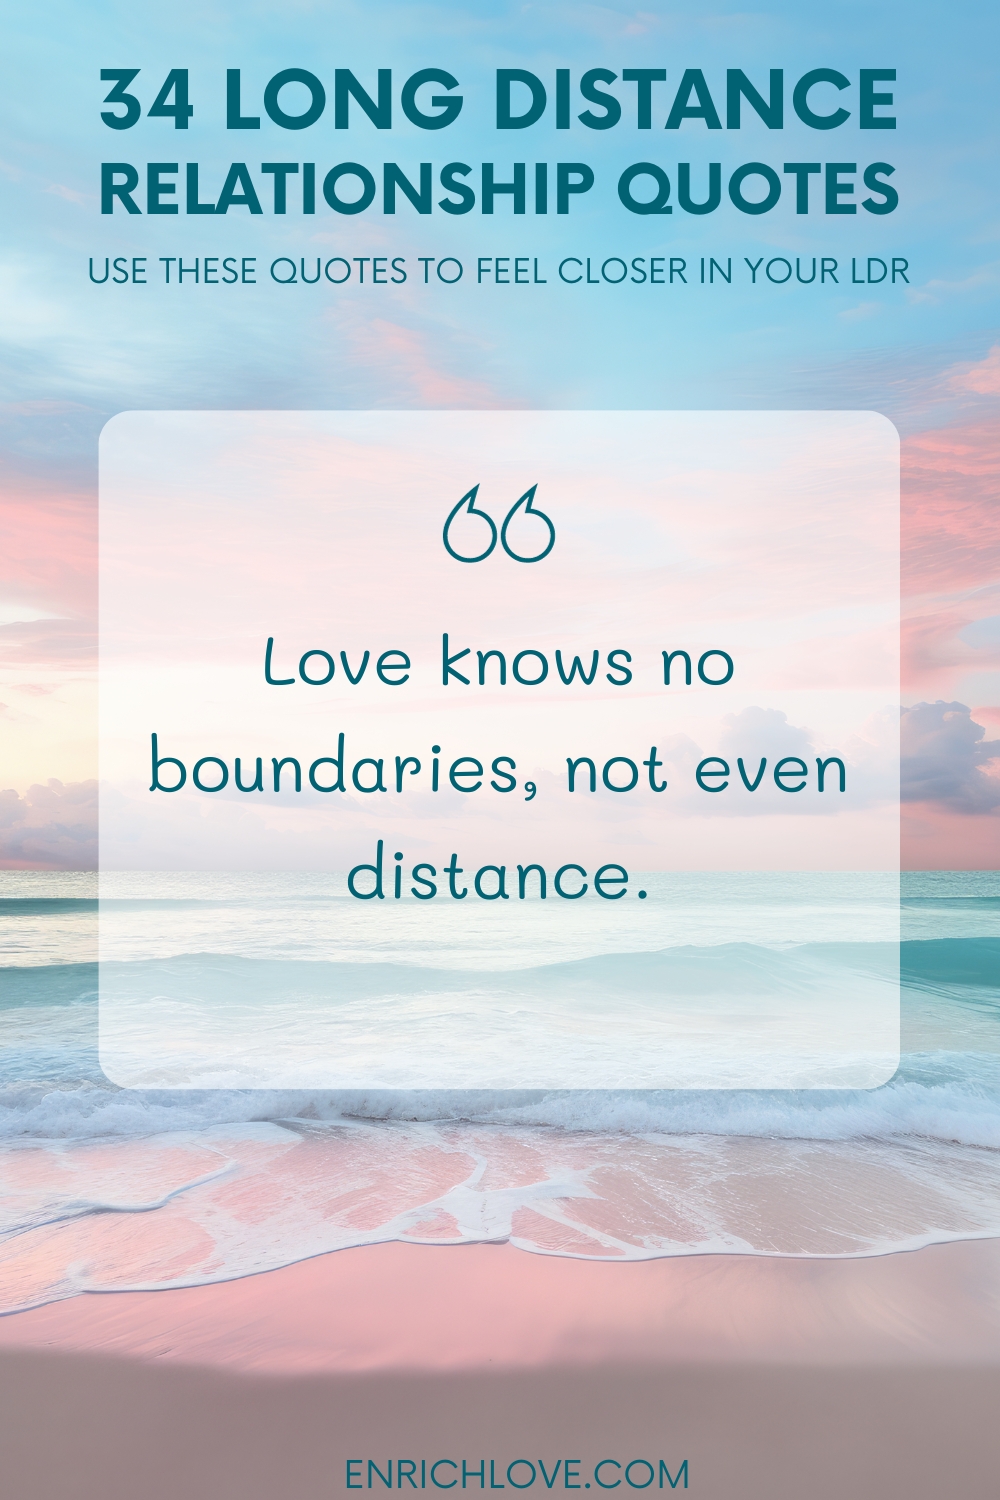 34 Long Distance Relationship Quotes - Love knows no boundaries, not even distance.